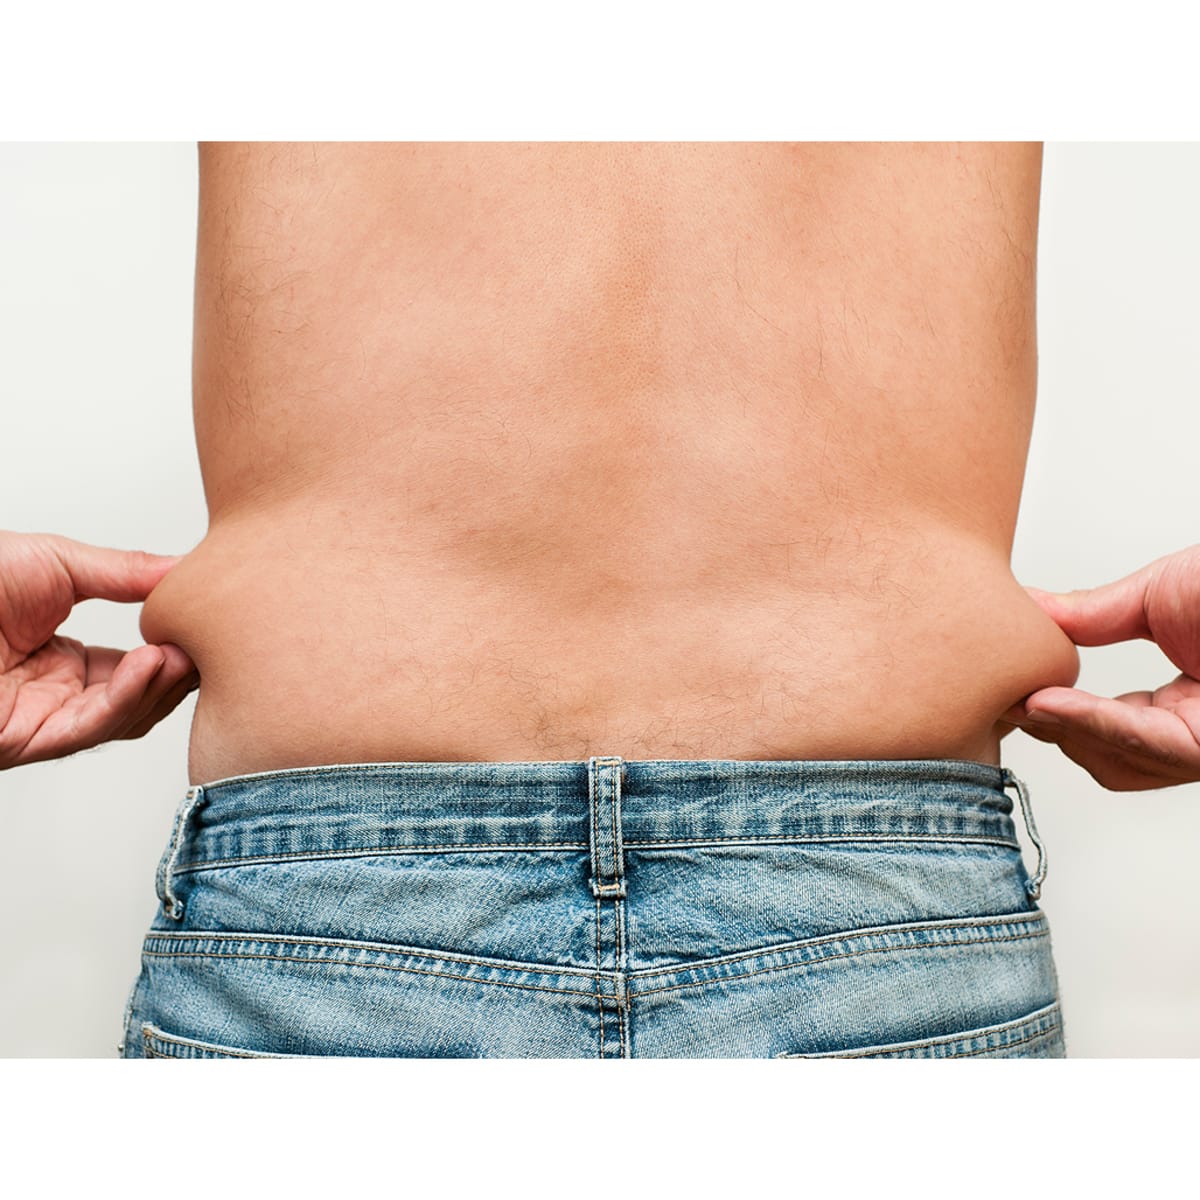 Trim Your Waistline And Say Goodbye To Love Handles: Expert Tips For Losing  Stubborn Belly Fat!, by Bcarterhc